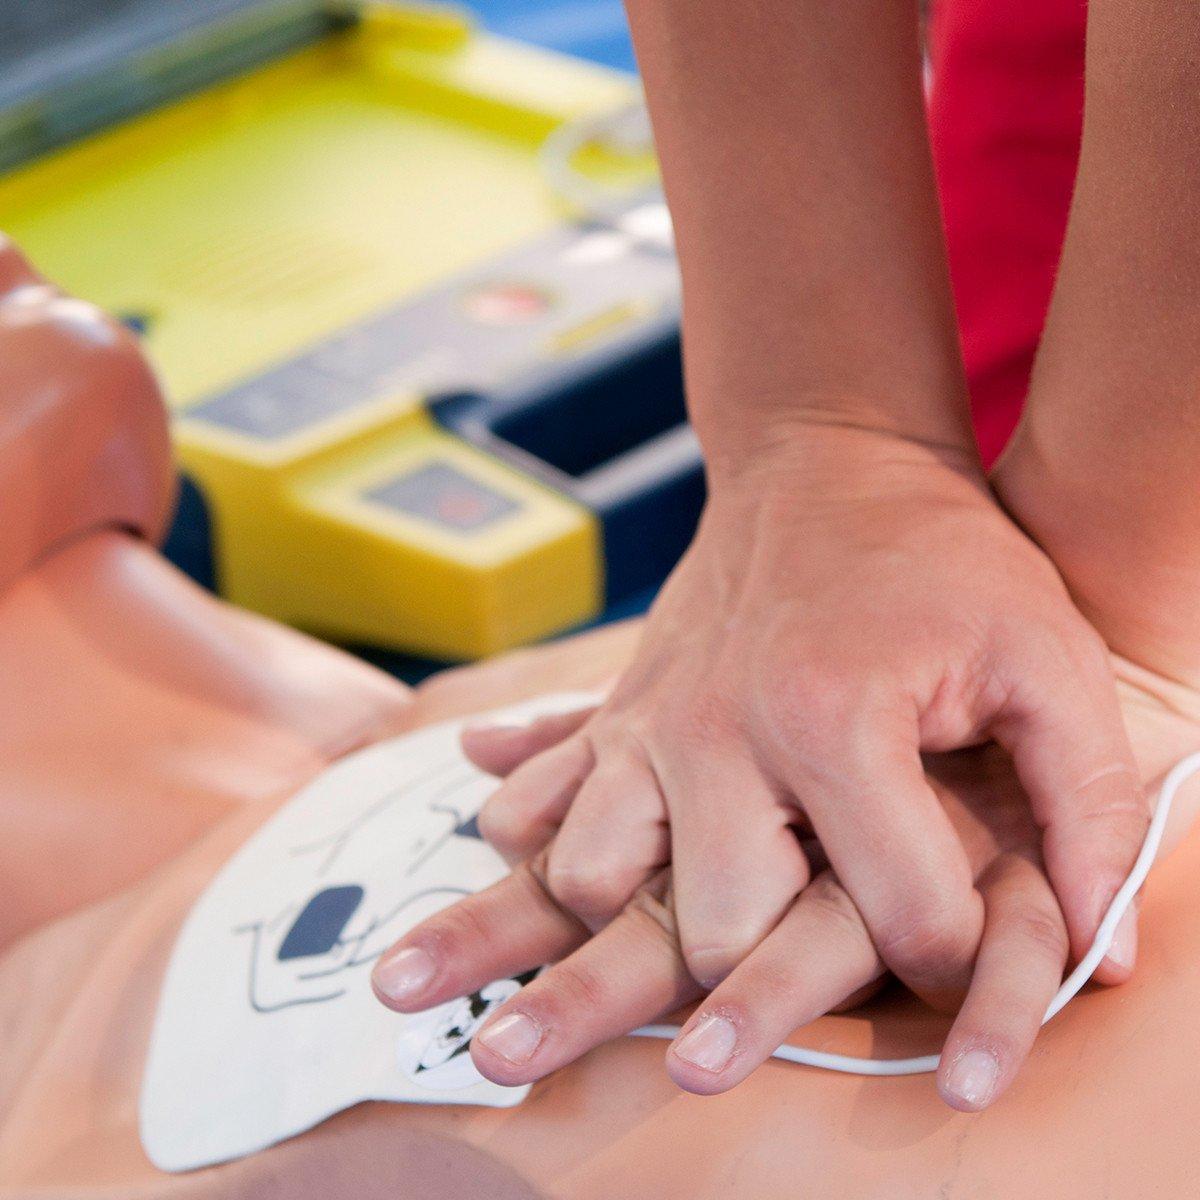 Emergency First Aid and CPR-C July 